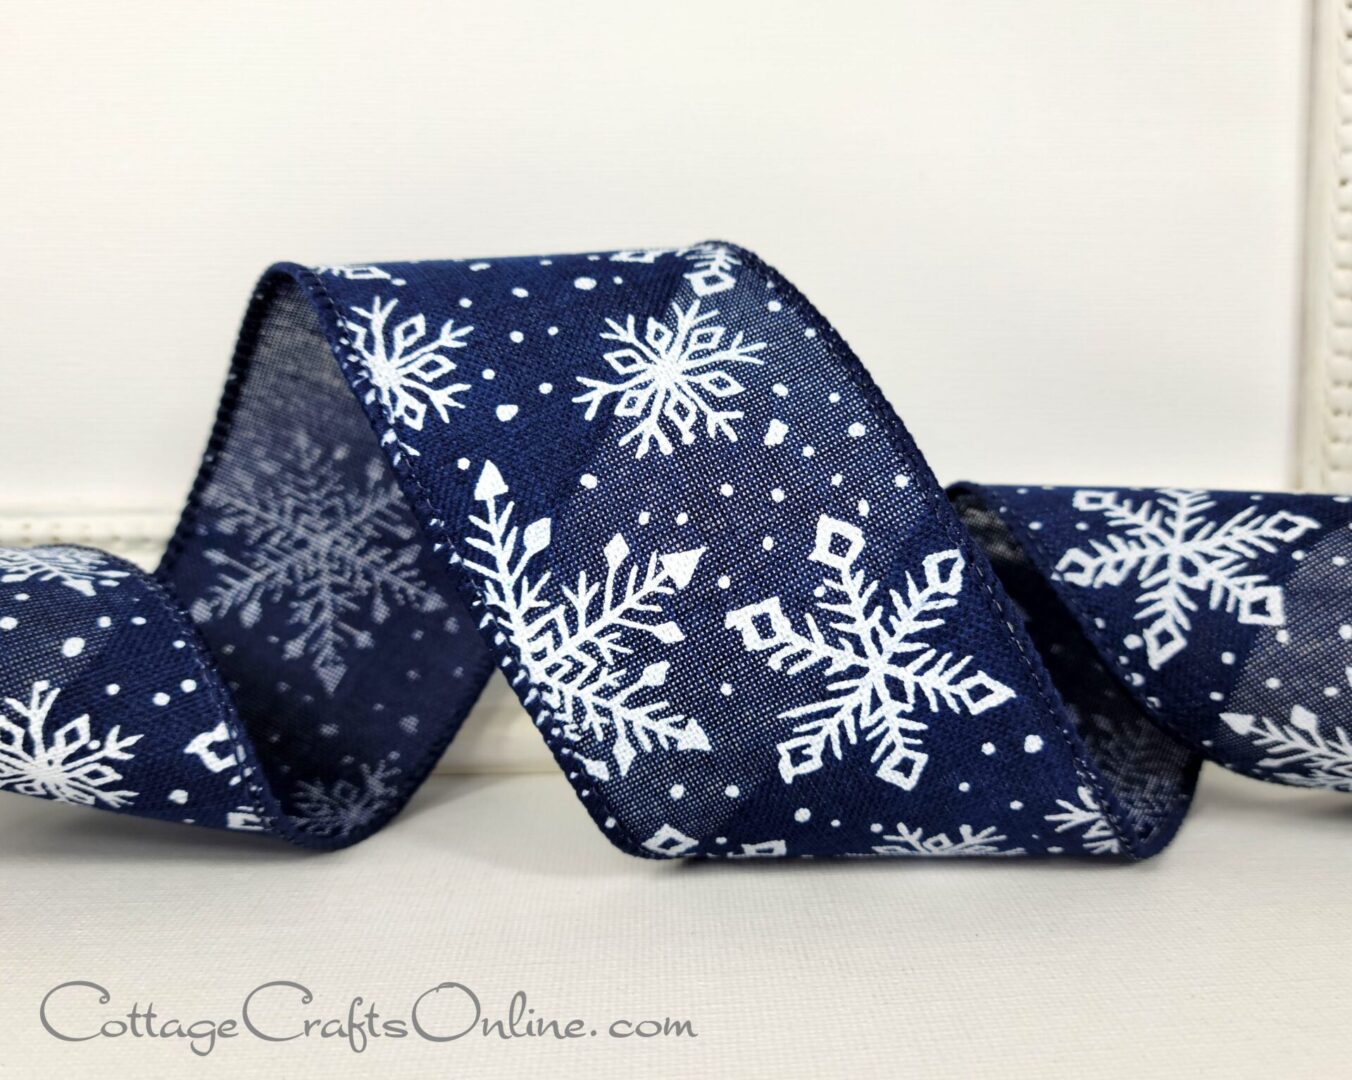 White snowflakes on navy 2.5" wide wired ribbon from the Etsy shop of Cottage Crafts Online.